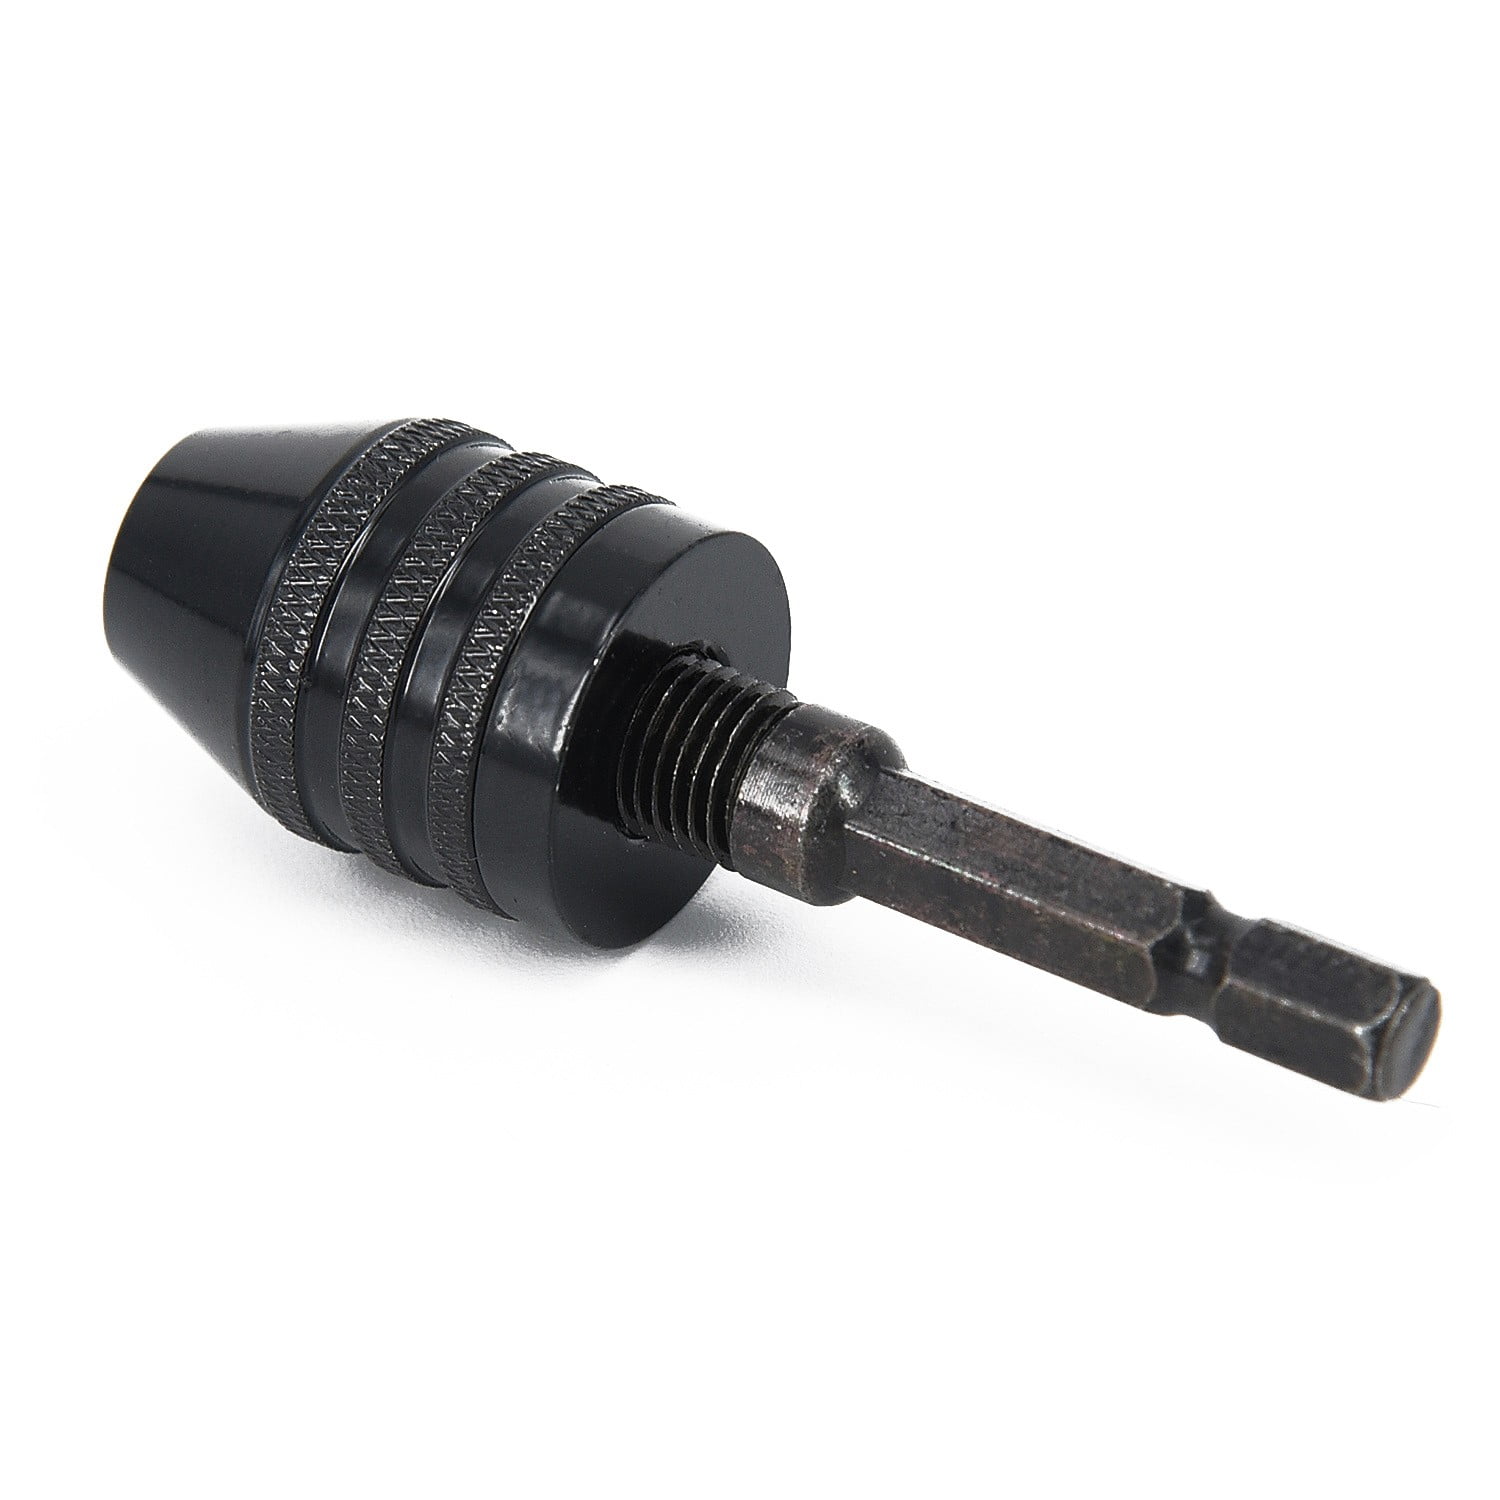 0.3-6.5mm Keyless Drill Bit Chuck Adapter with 1/4" Hex Shank for Impact Driver 